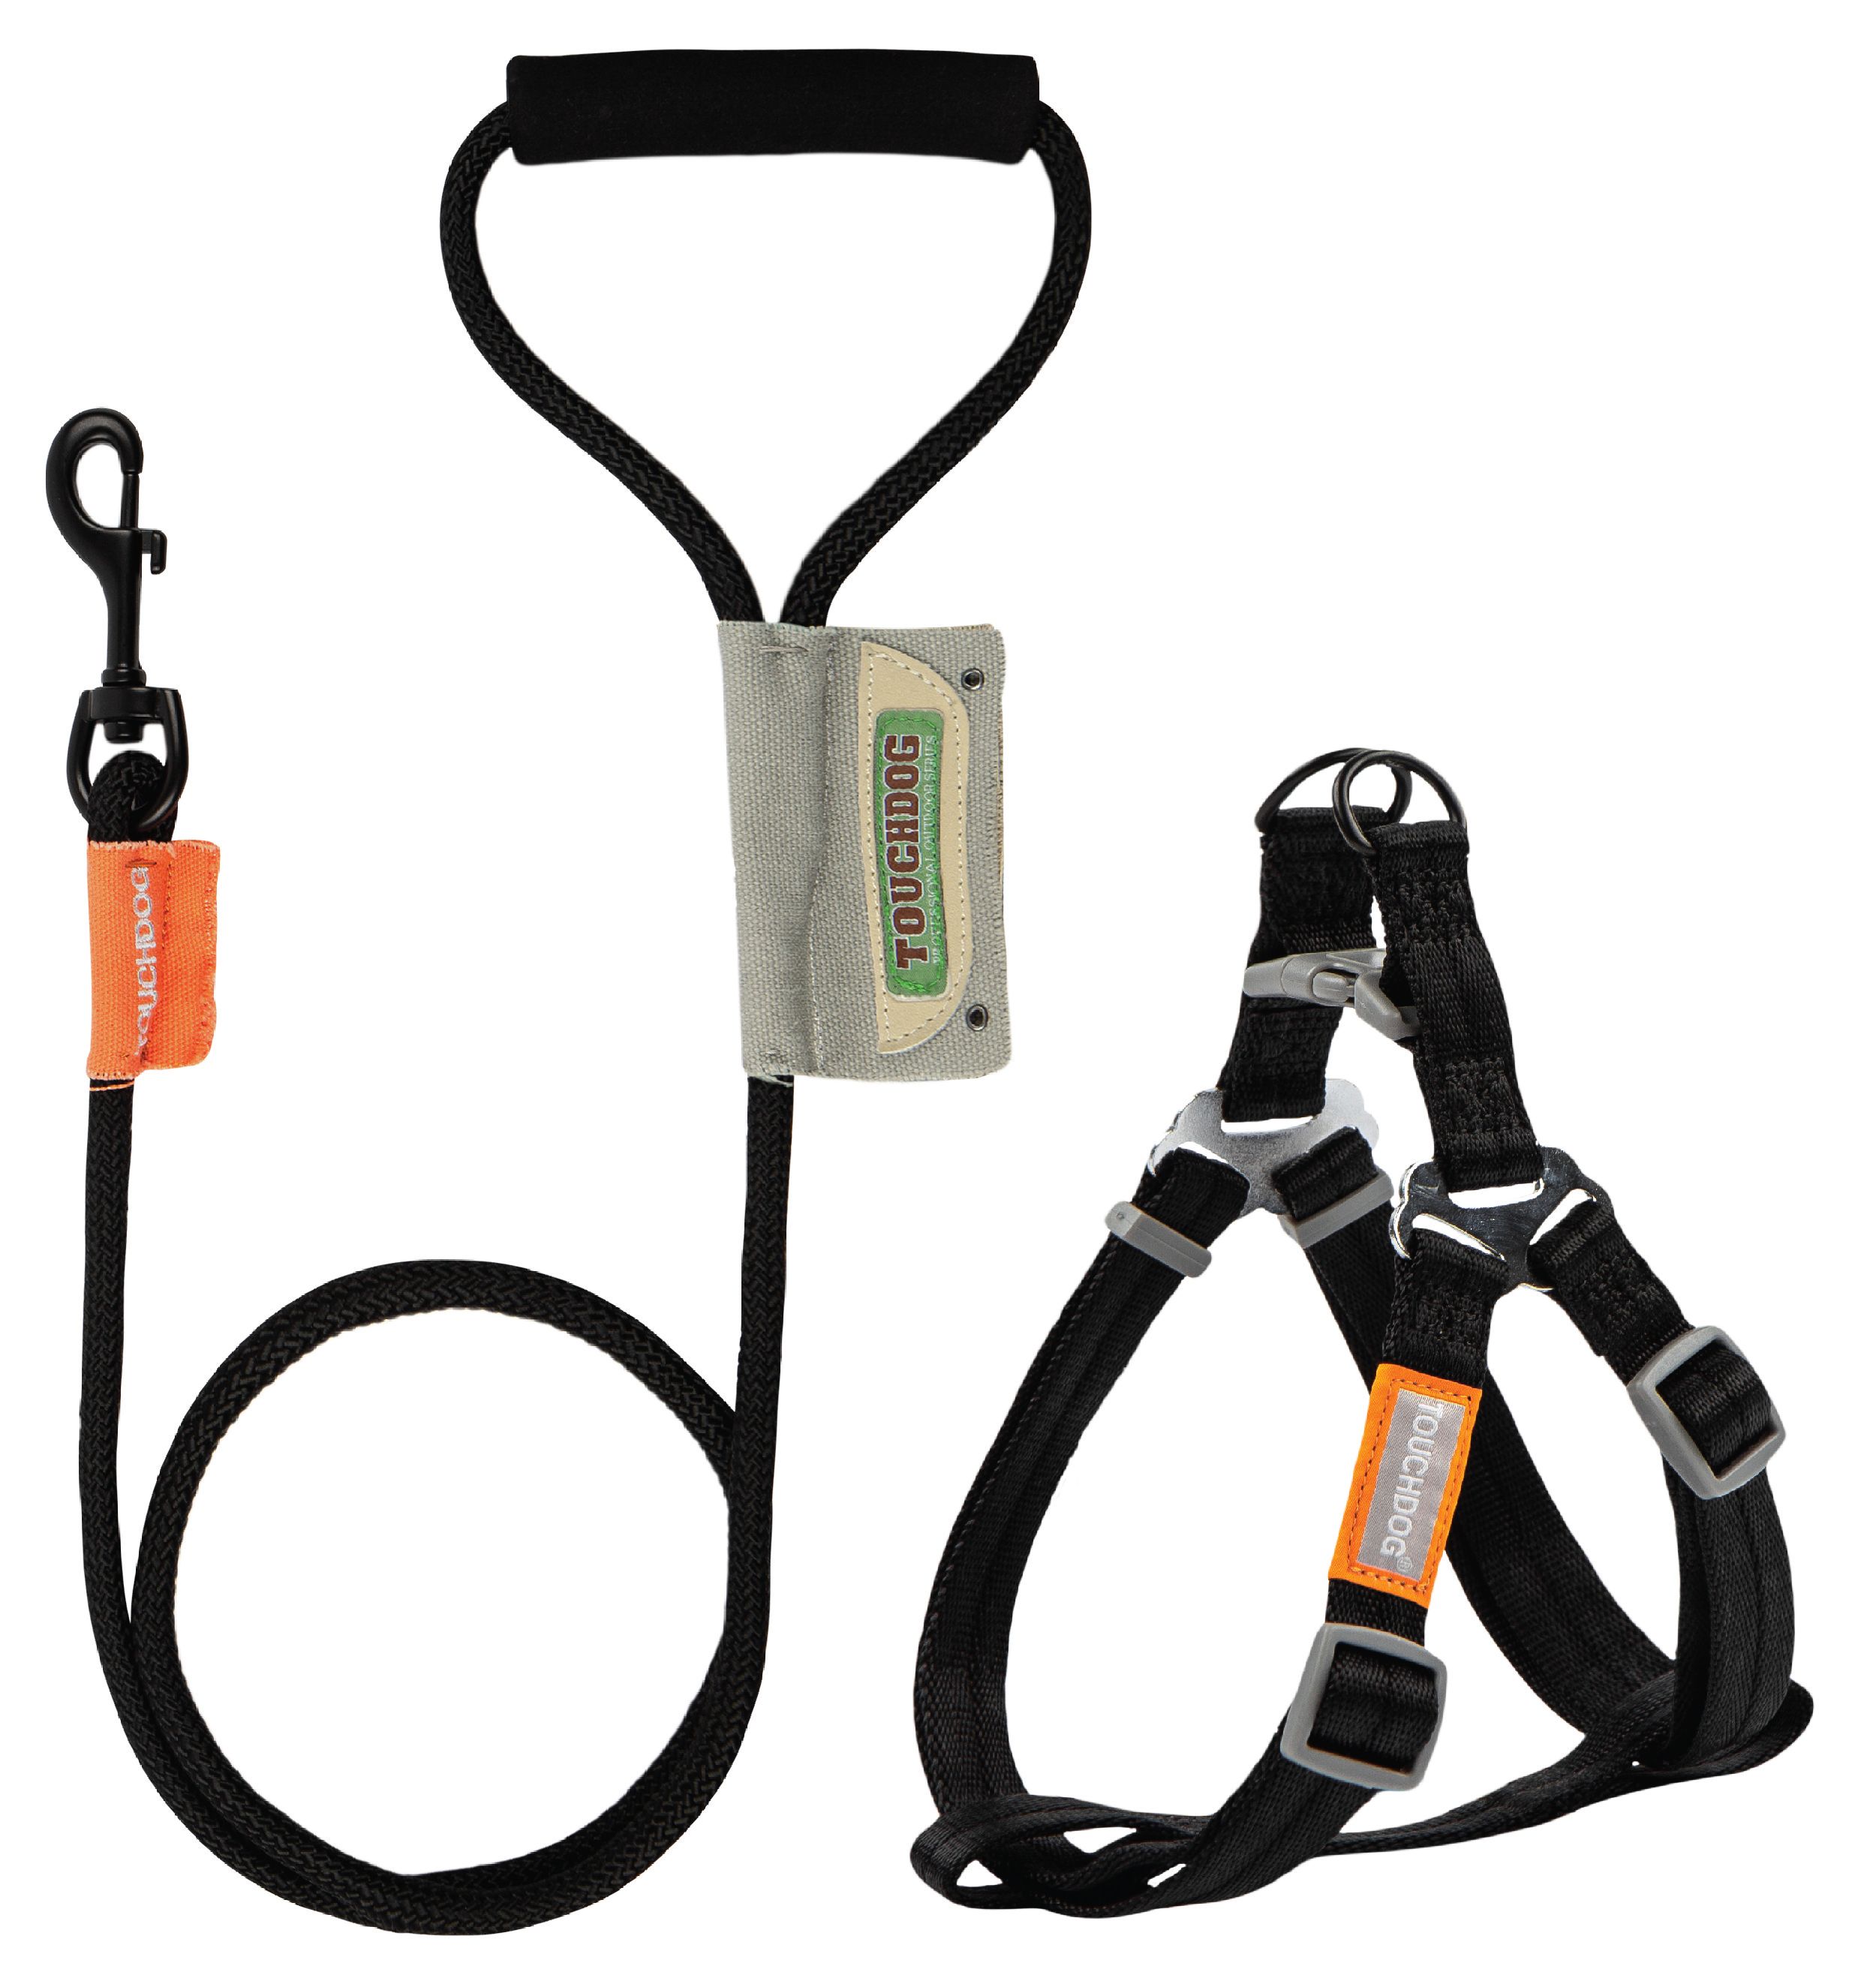 Touchdog ® 'Macaron' 2-in-1 Durable Nylon Dog Harness and Leash Black Small